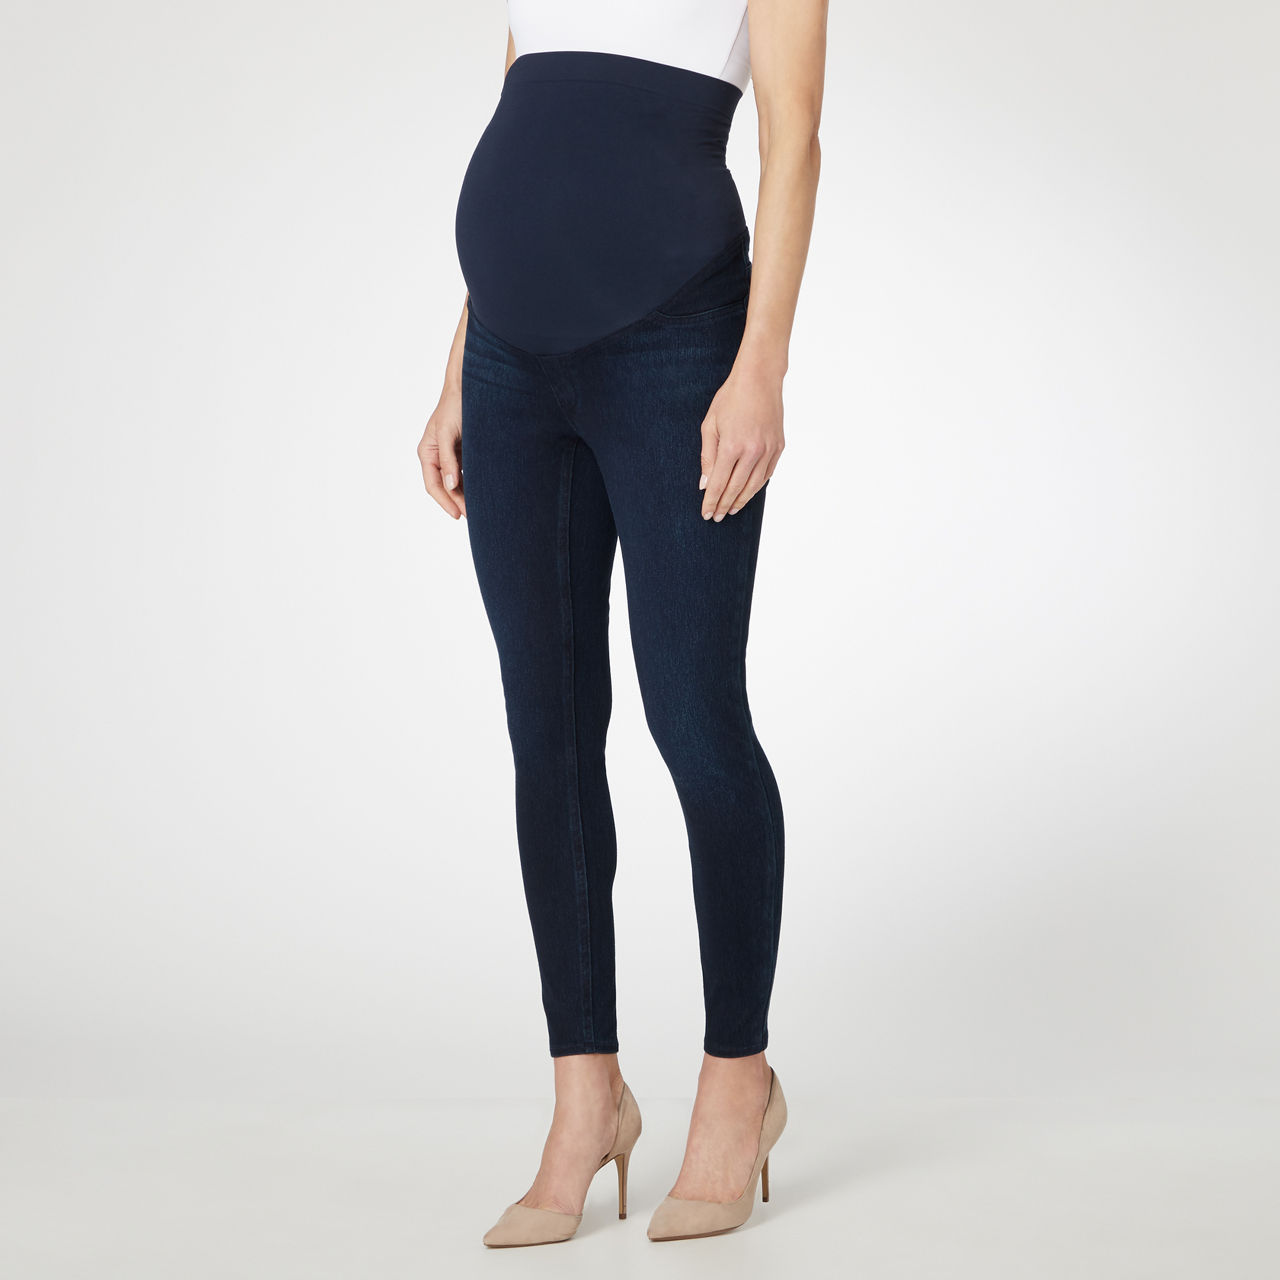 Jean-ious! Spanx introduces line of jeggings